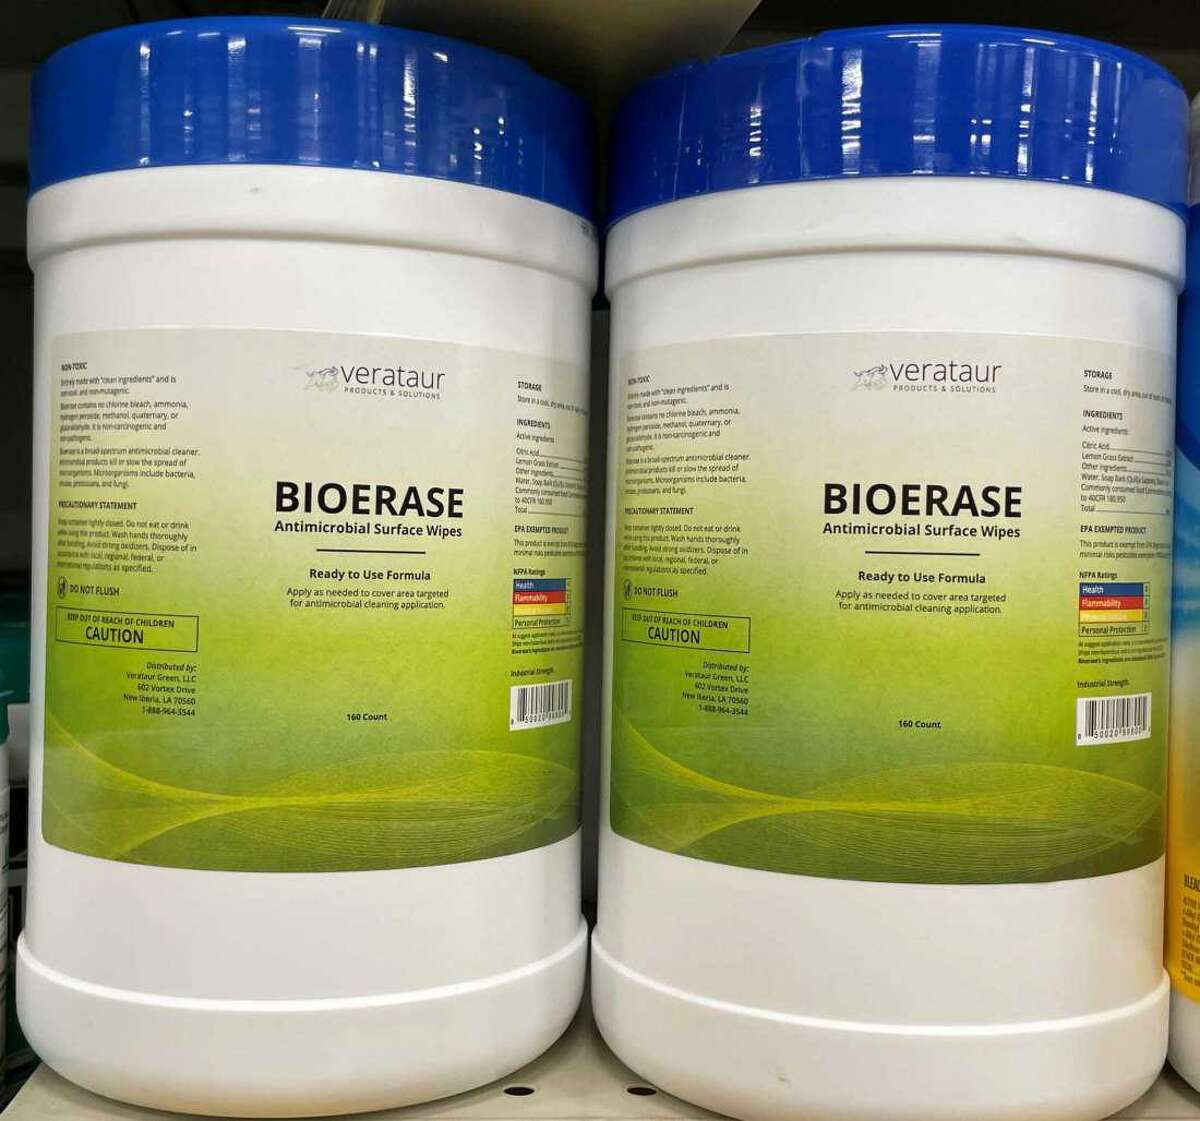 The Environmental Protection Agency instructed H-E-B to remove BioErase antimicrobial surface wipes from store shelves within 30 days, the grocer says in an amended lawsuit this month. It’s the latest twist in a dispute with the wipes’ Beaumont distributor.